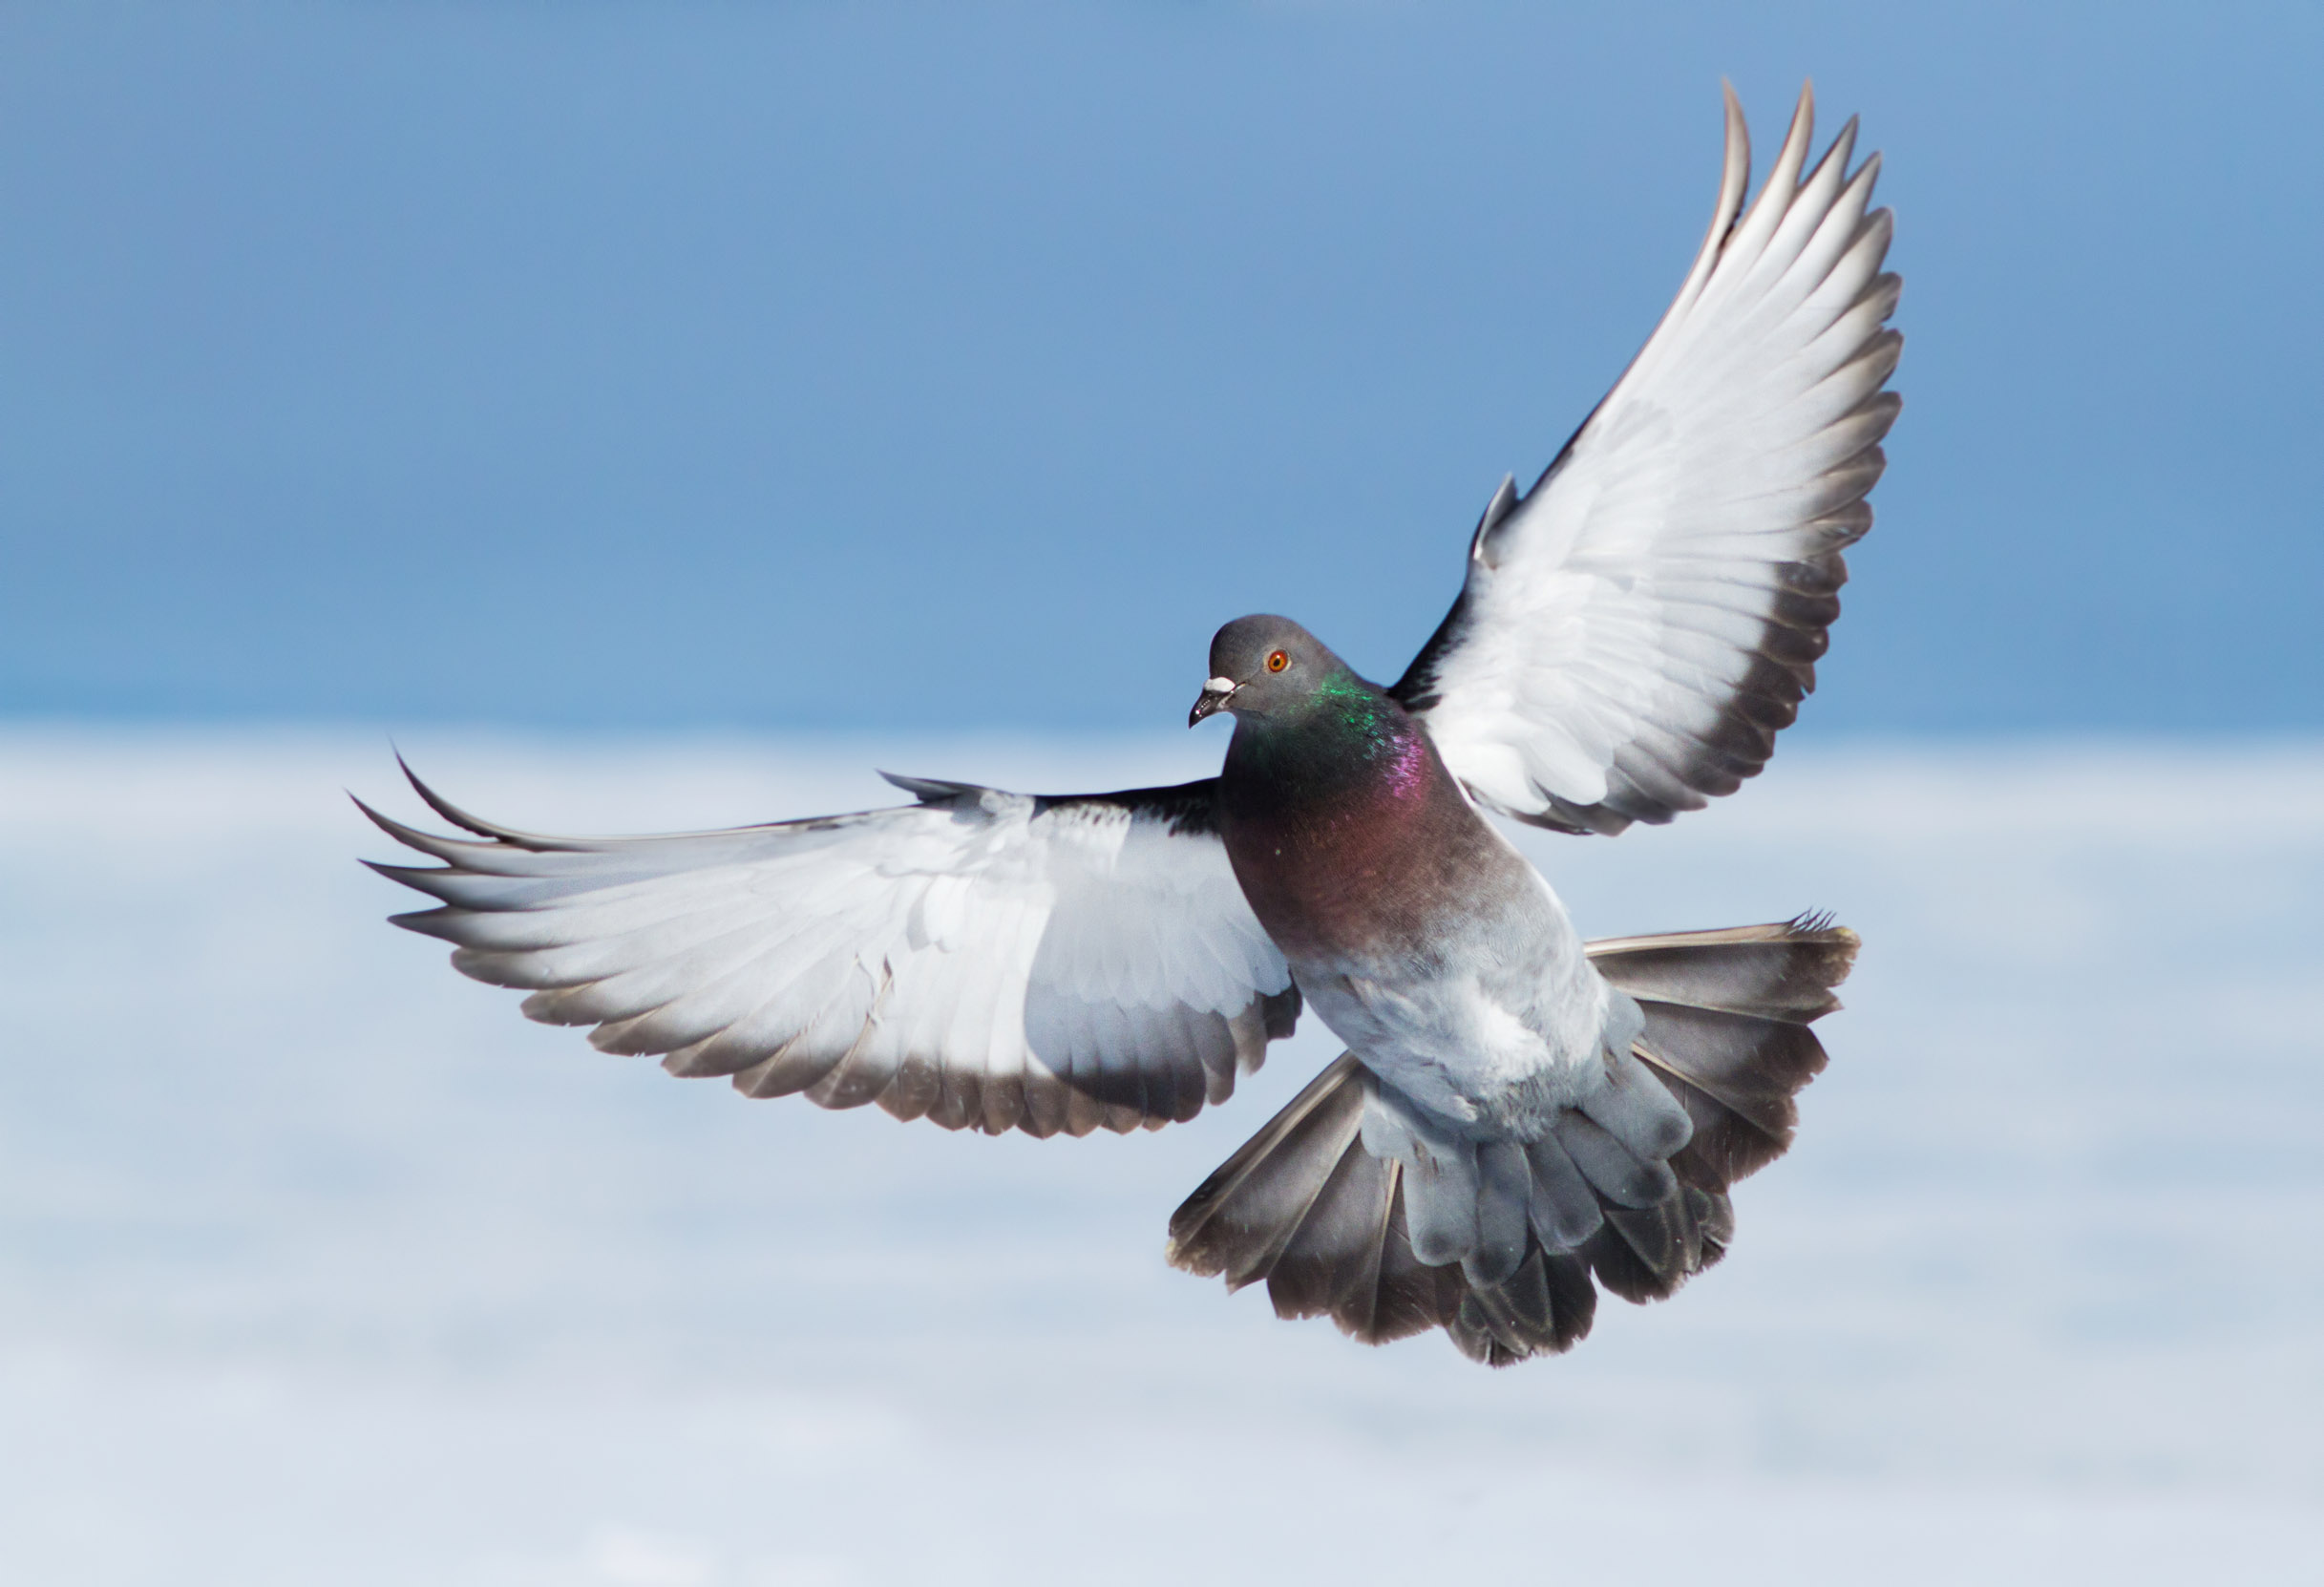 A Rock Dove, Pigeon, flying with wings splayed.